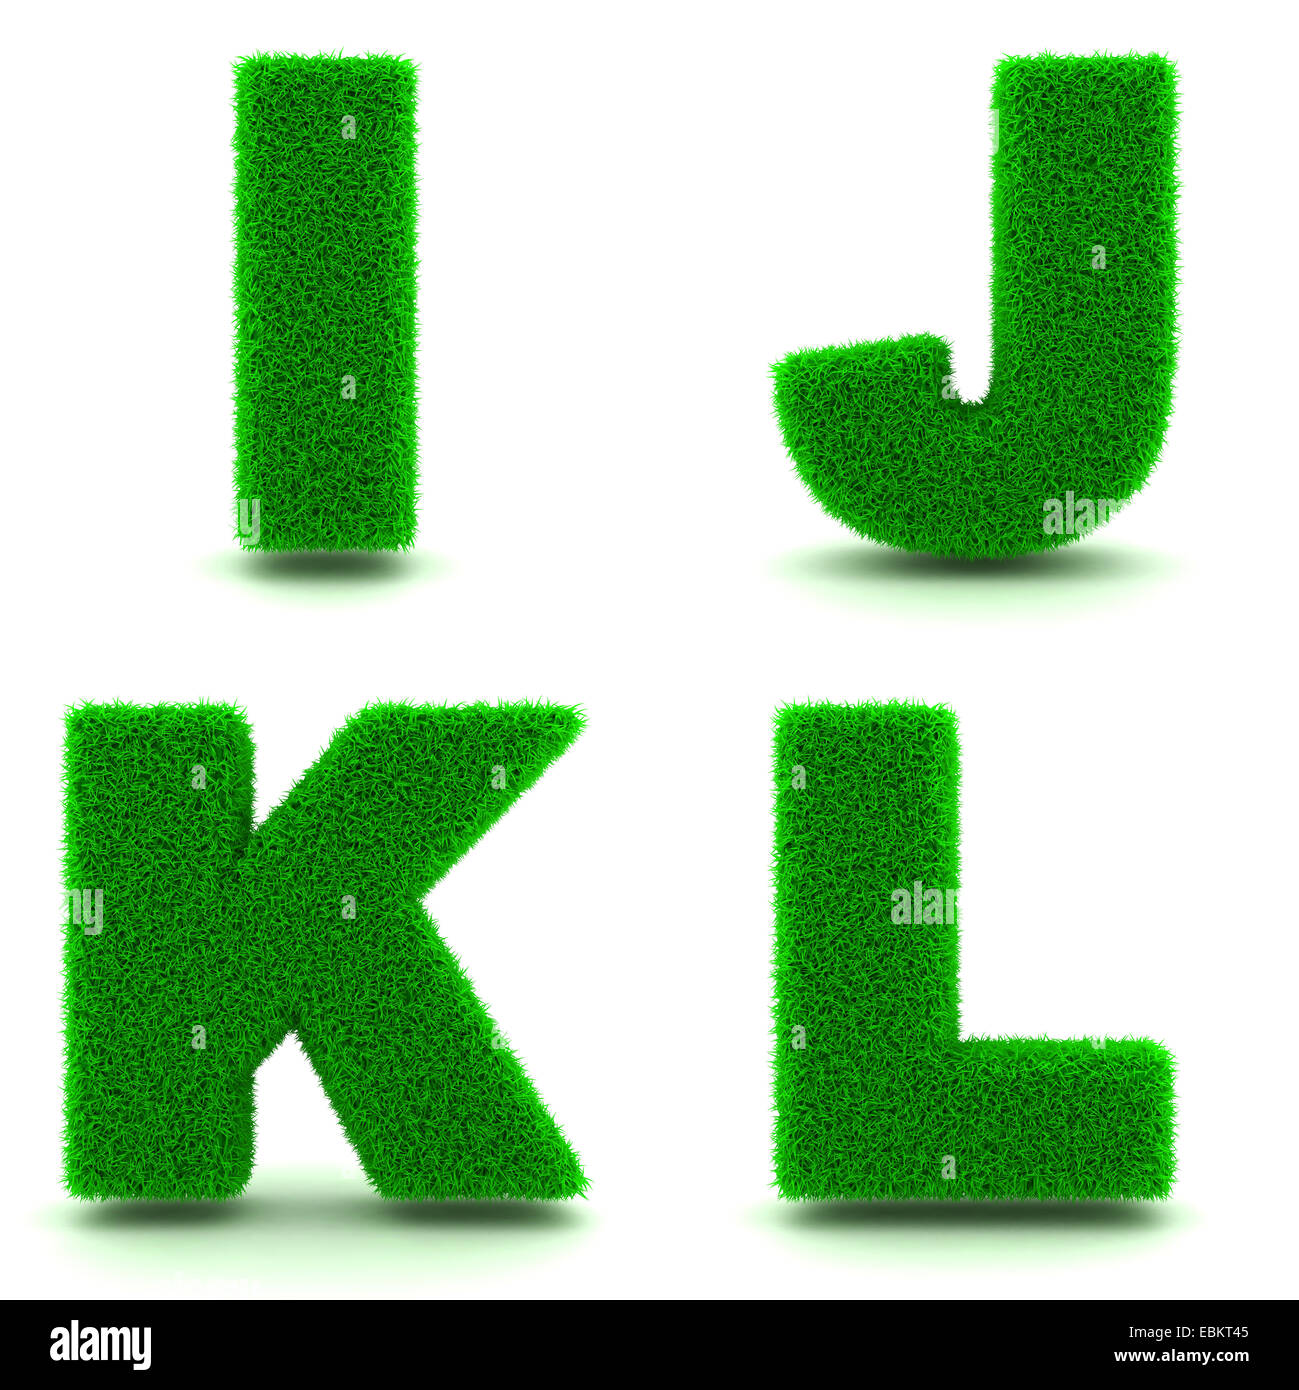 Letters I, J, K, L - Alphabet Set of Green Grass on White Background in 3d. Stock Photo